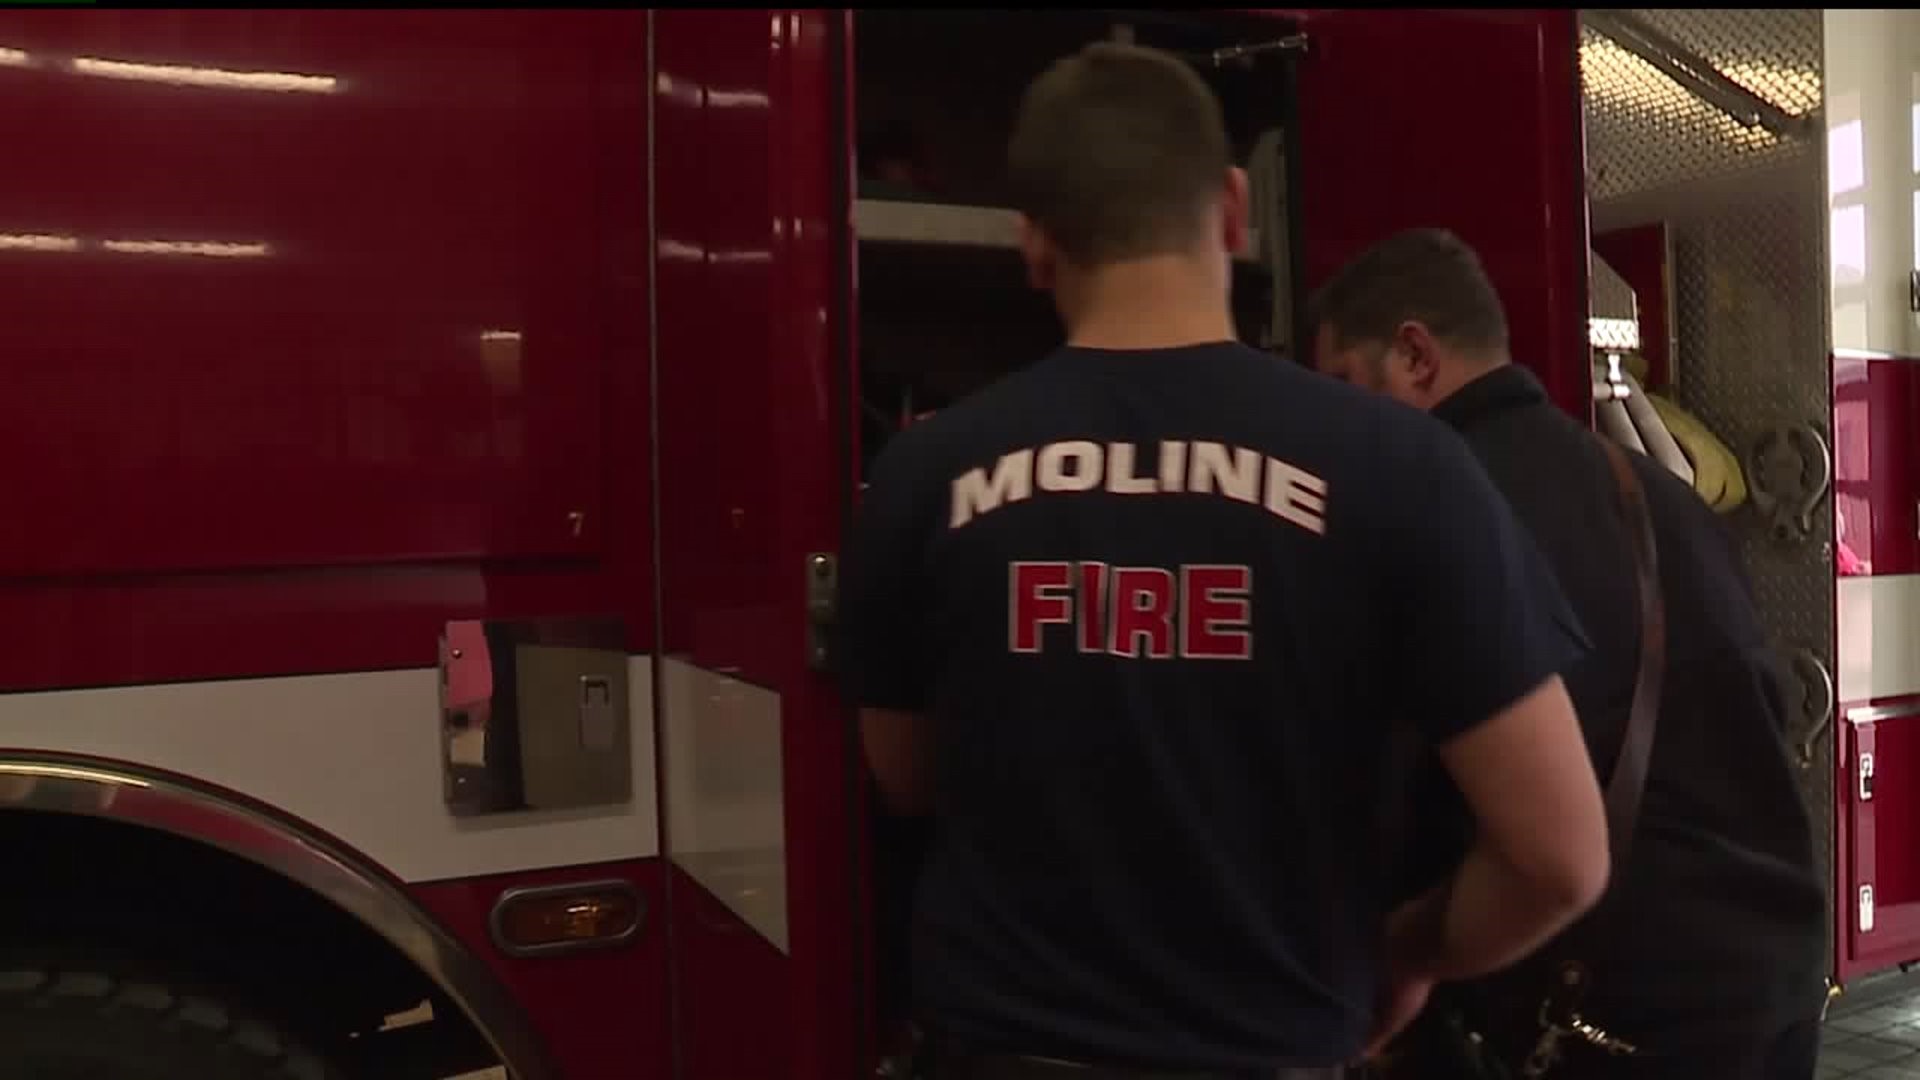 Moline seeks to fill job openings in Fire Departments